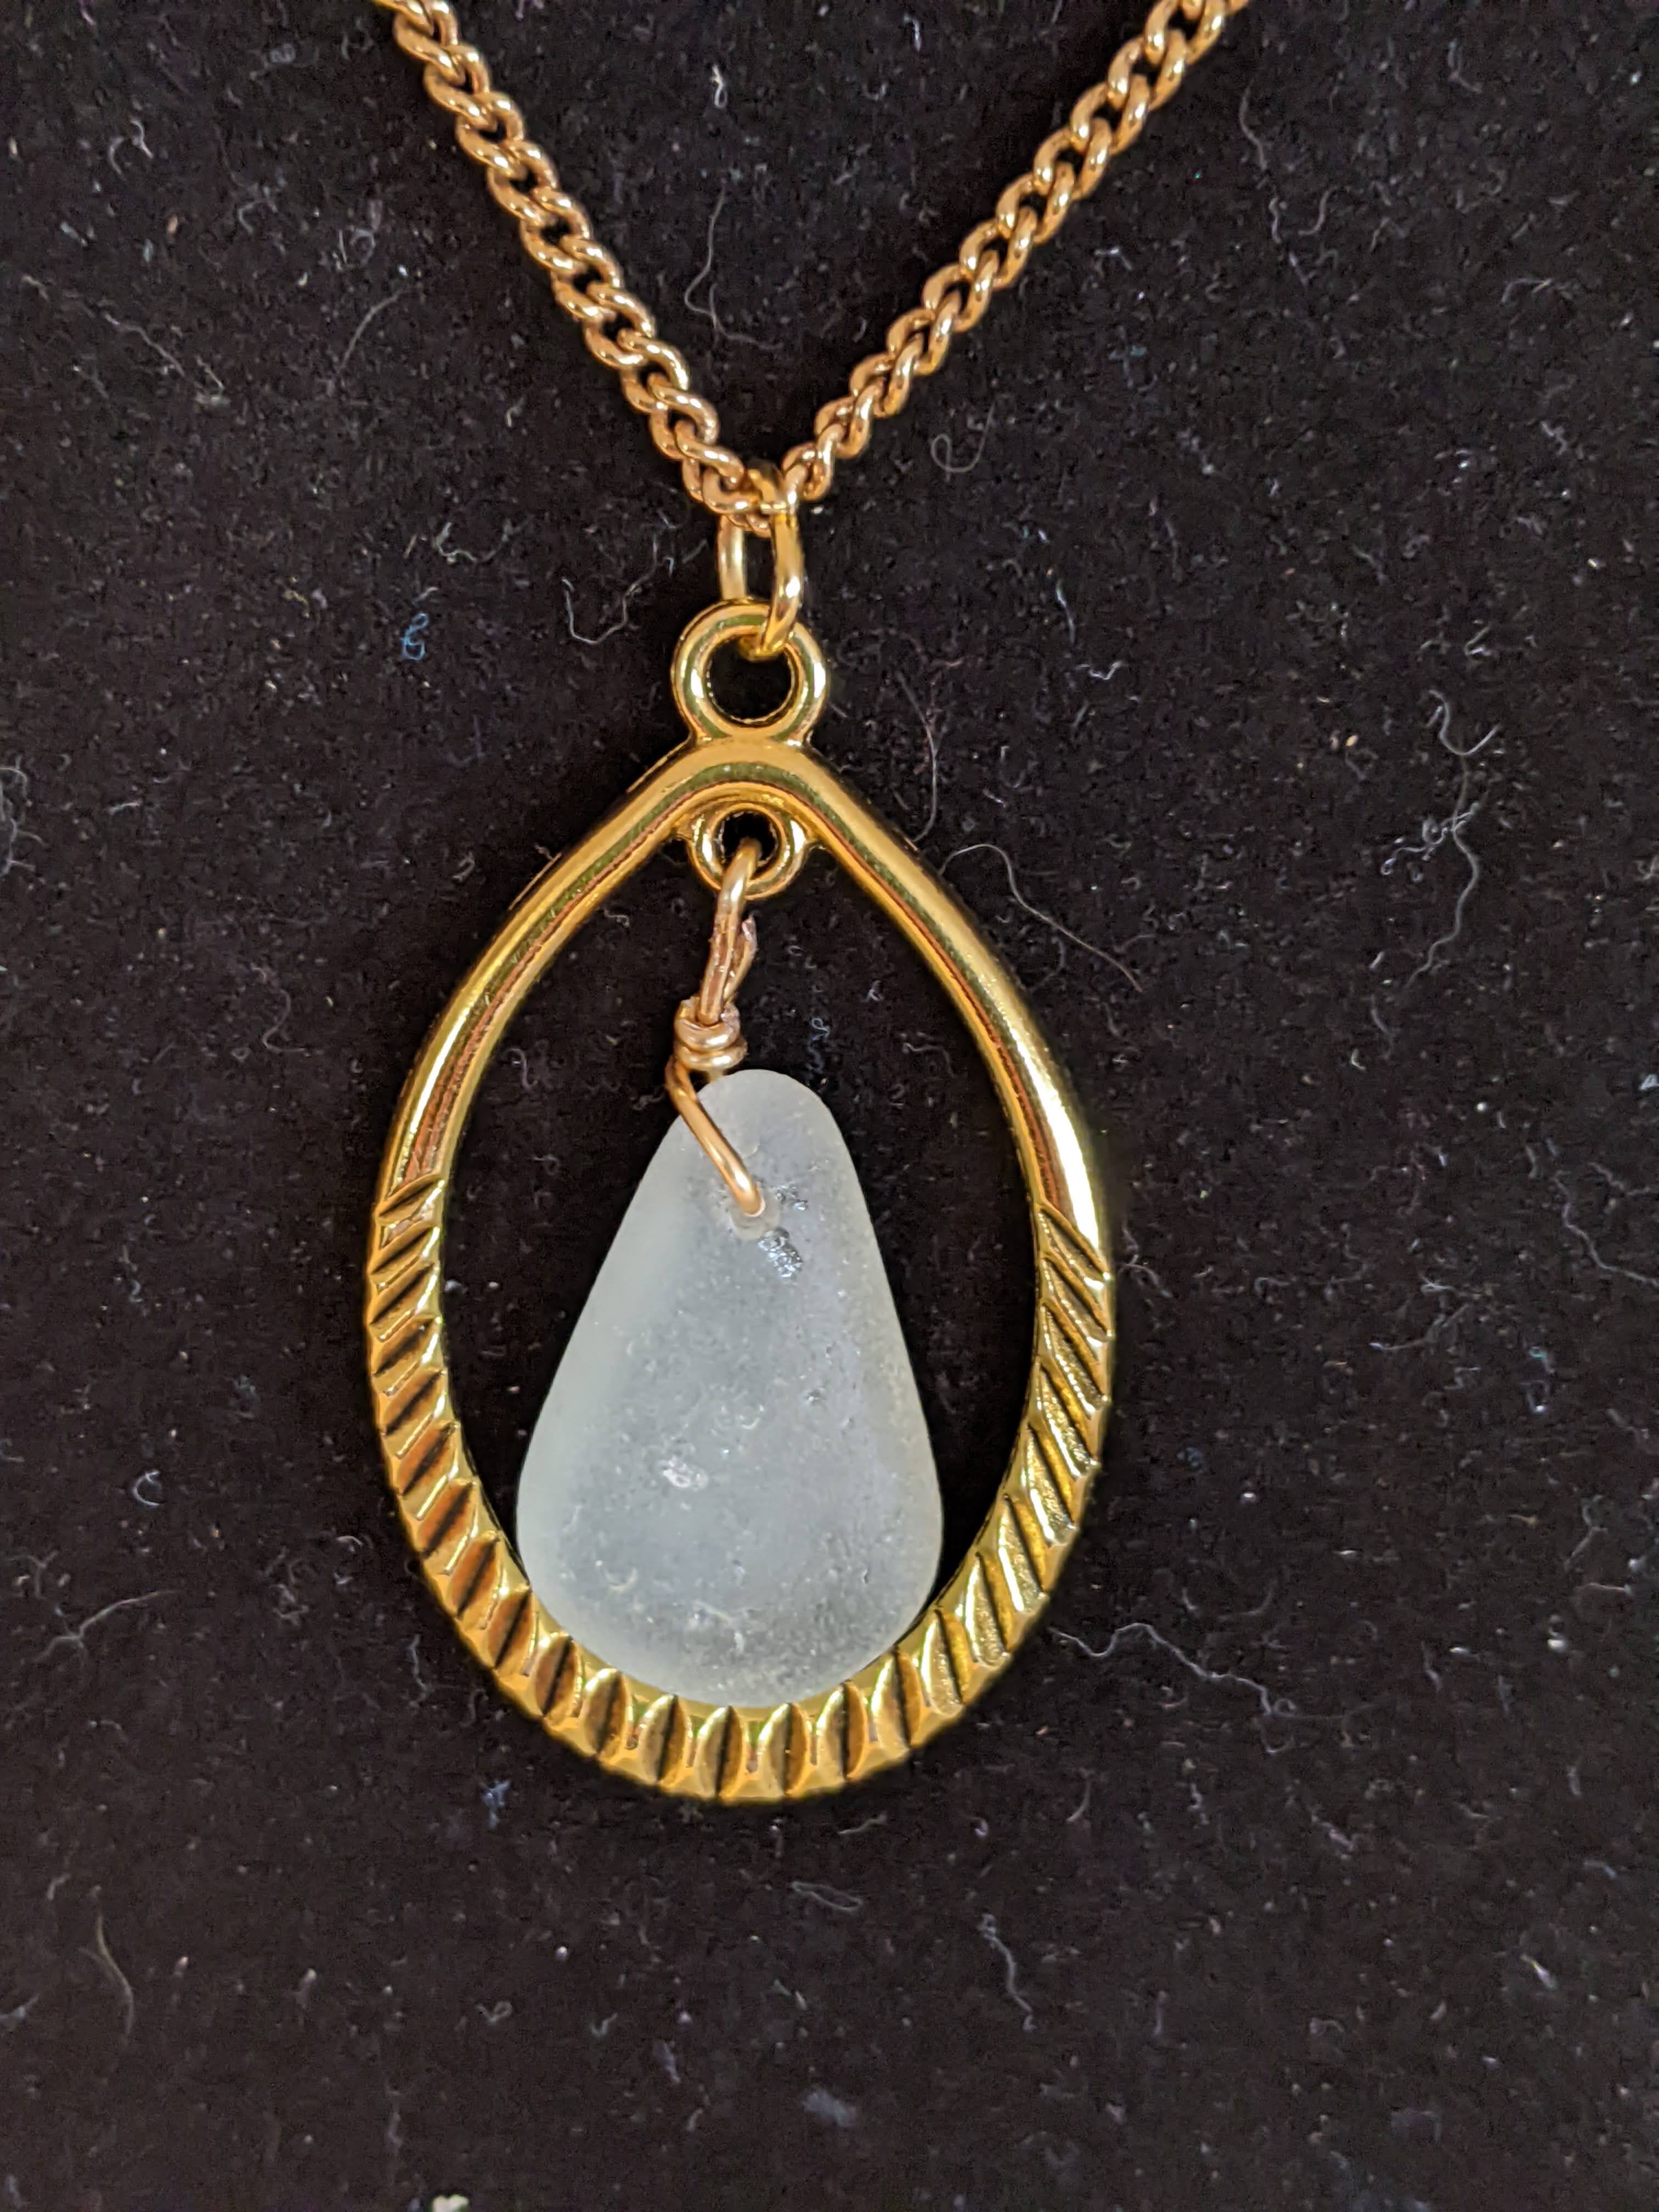 Gold necklace with white seaglass